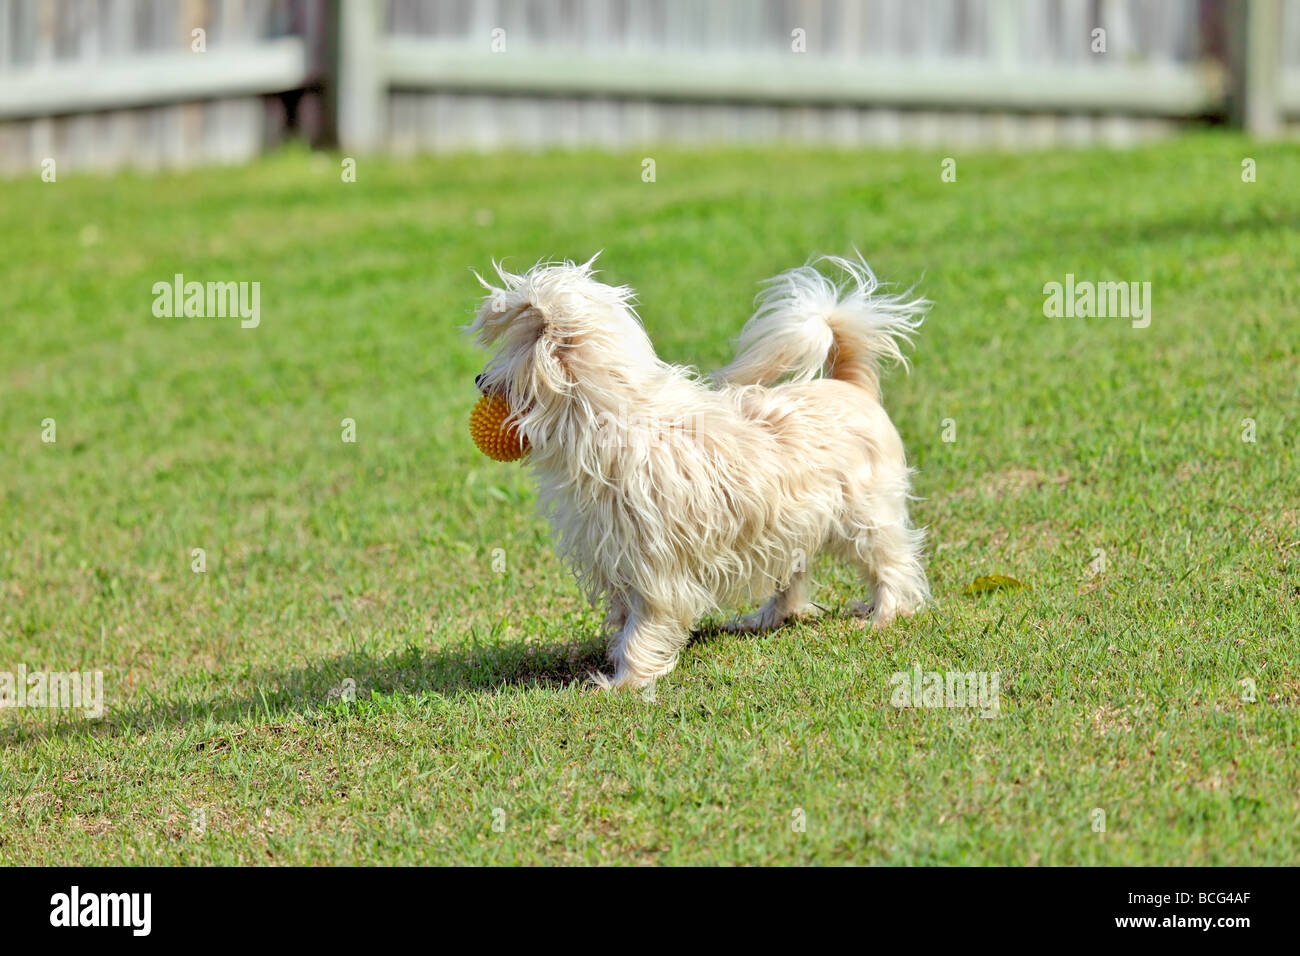 Sydney silky terrier at play with a ball Stock Photo